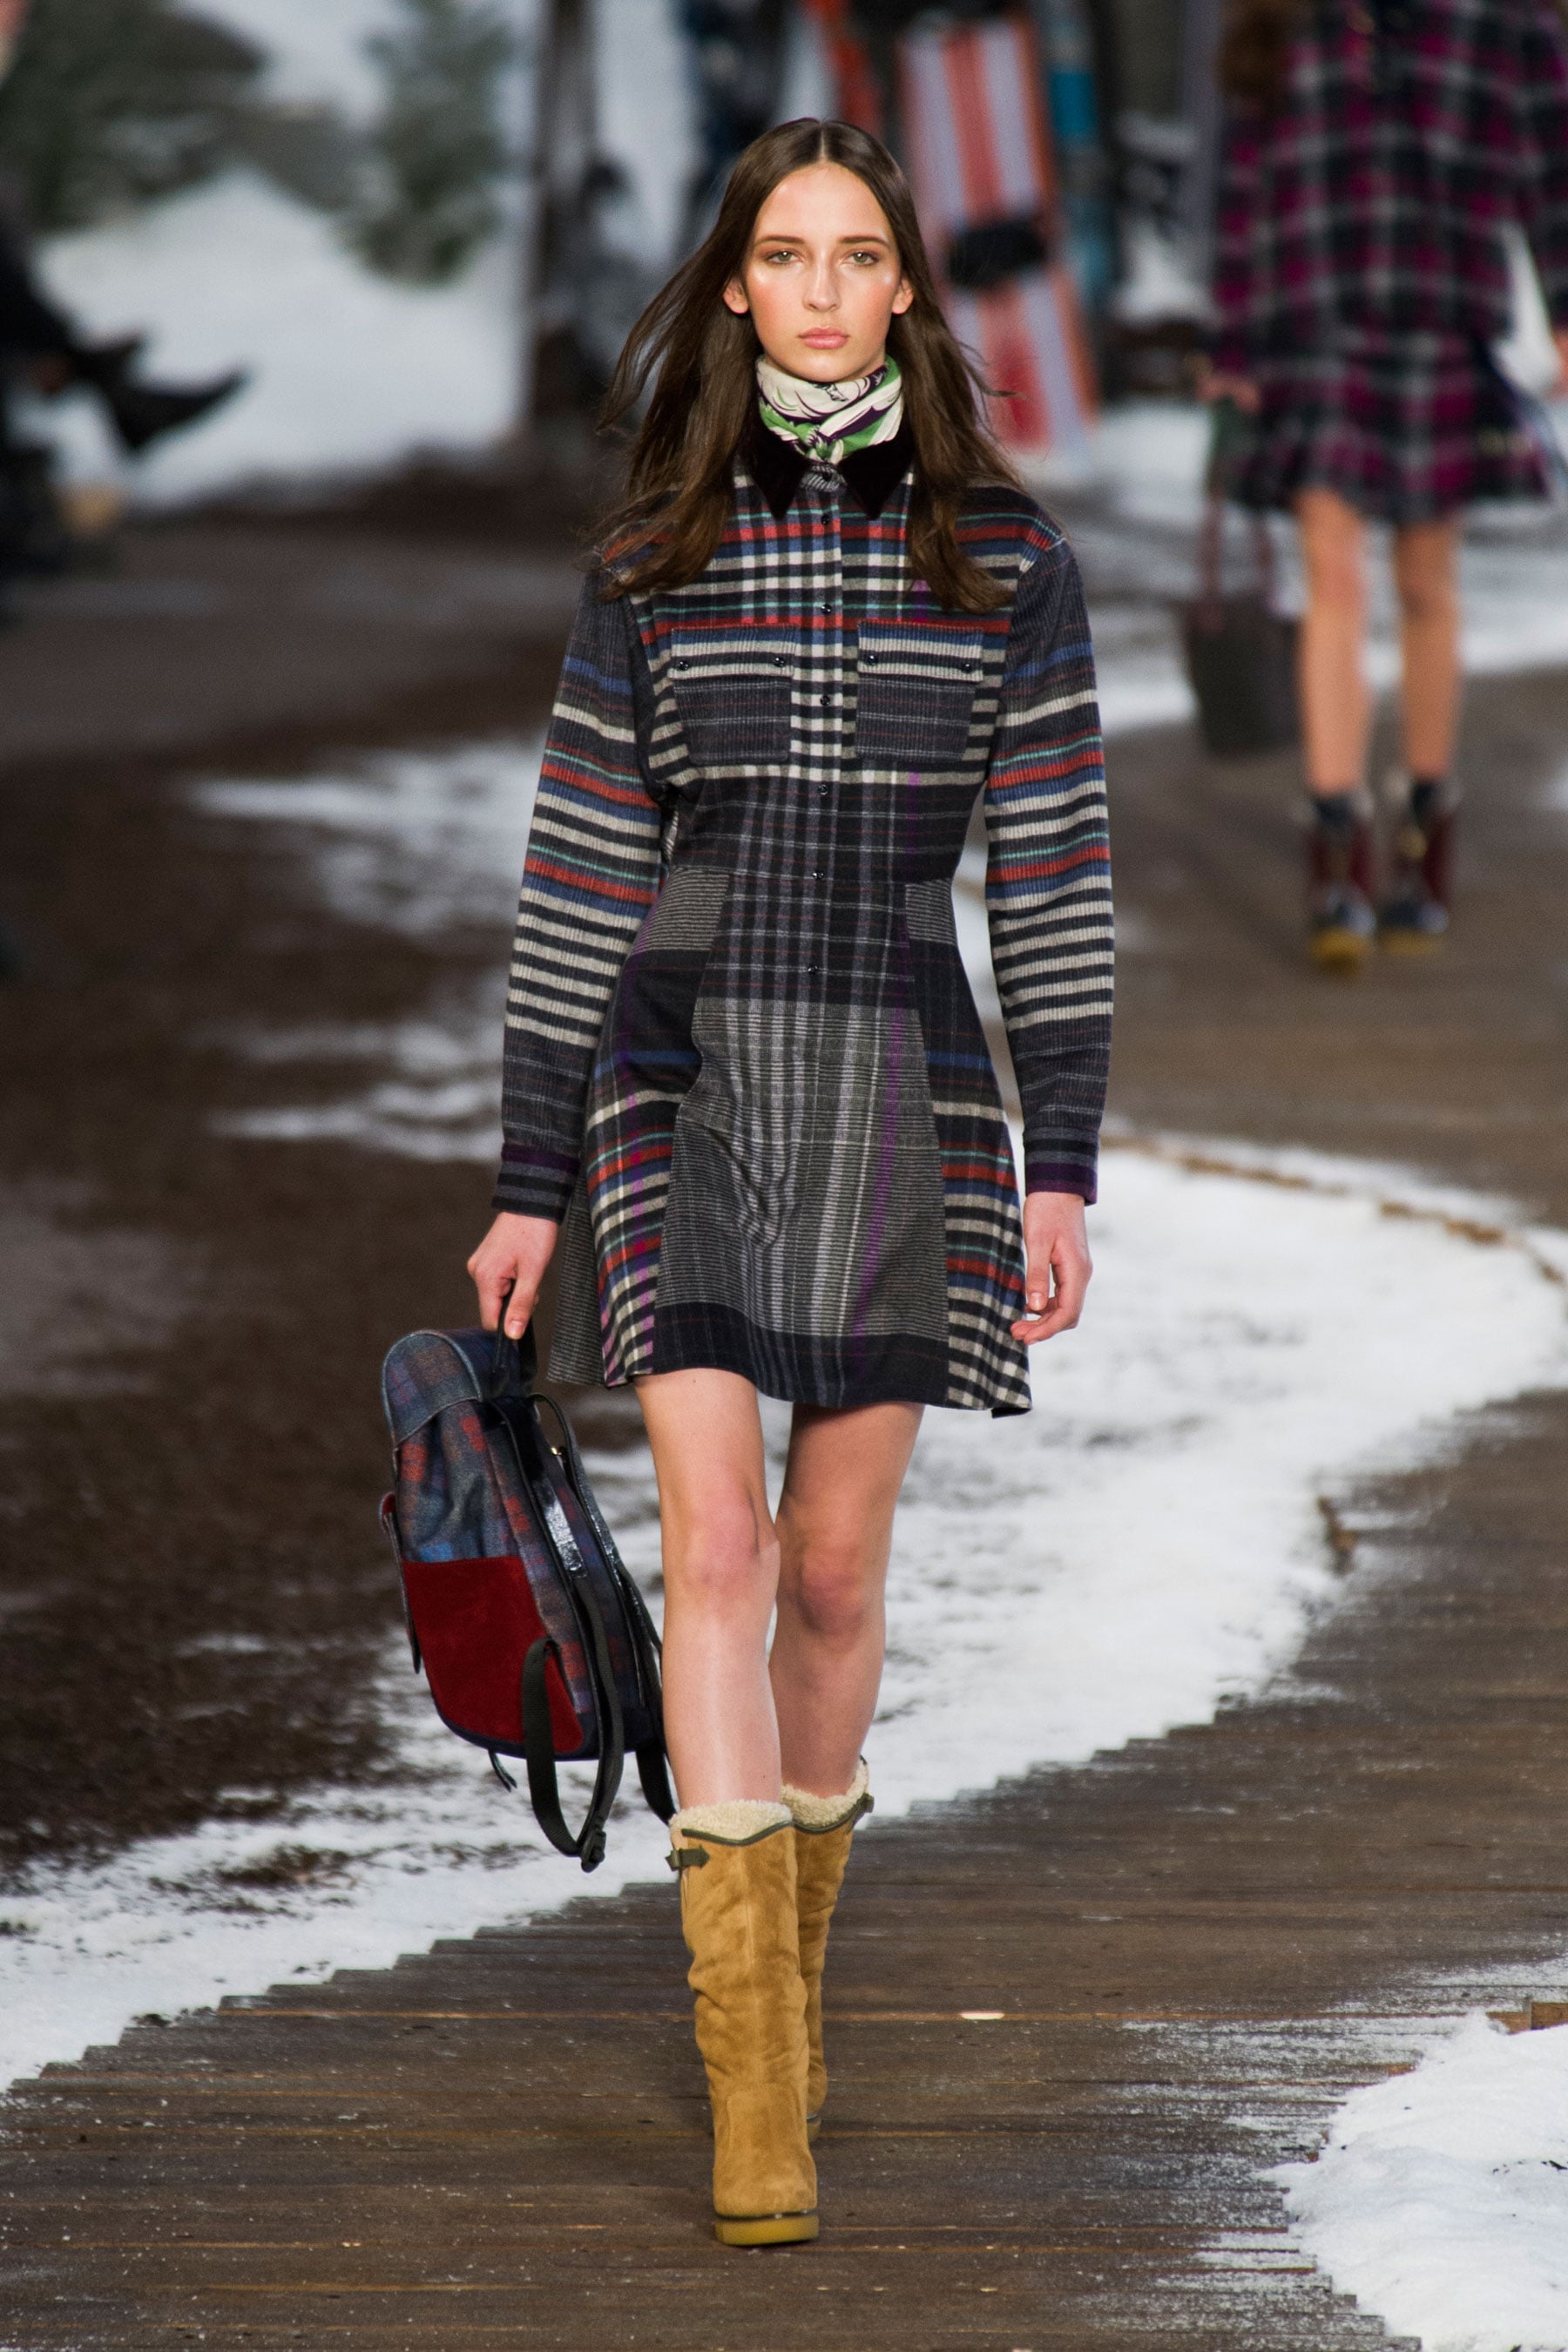 Tommy Fall 2014 We Want to Do More Than With Tommy Hilfiger | POPSUGAR Fashion Photo 27